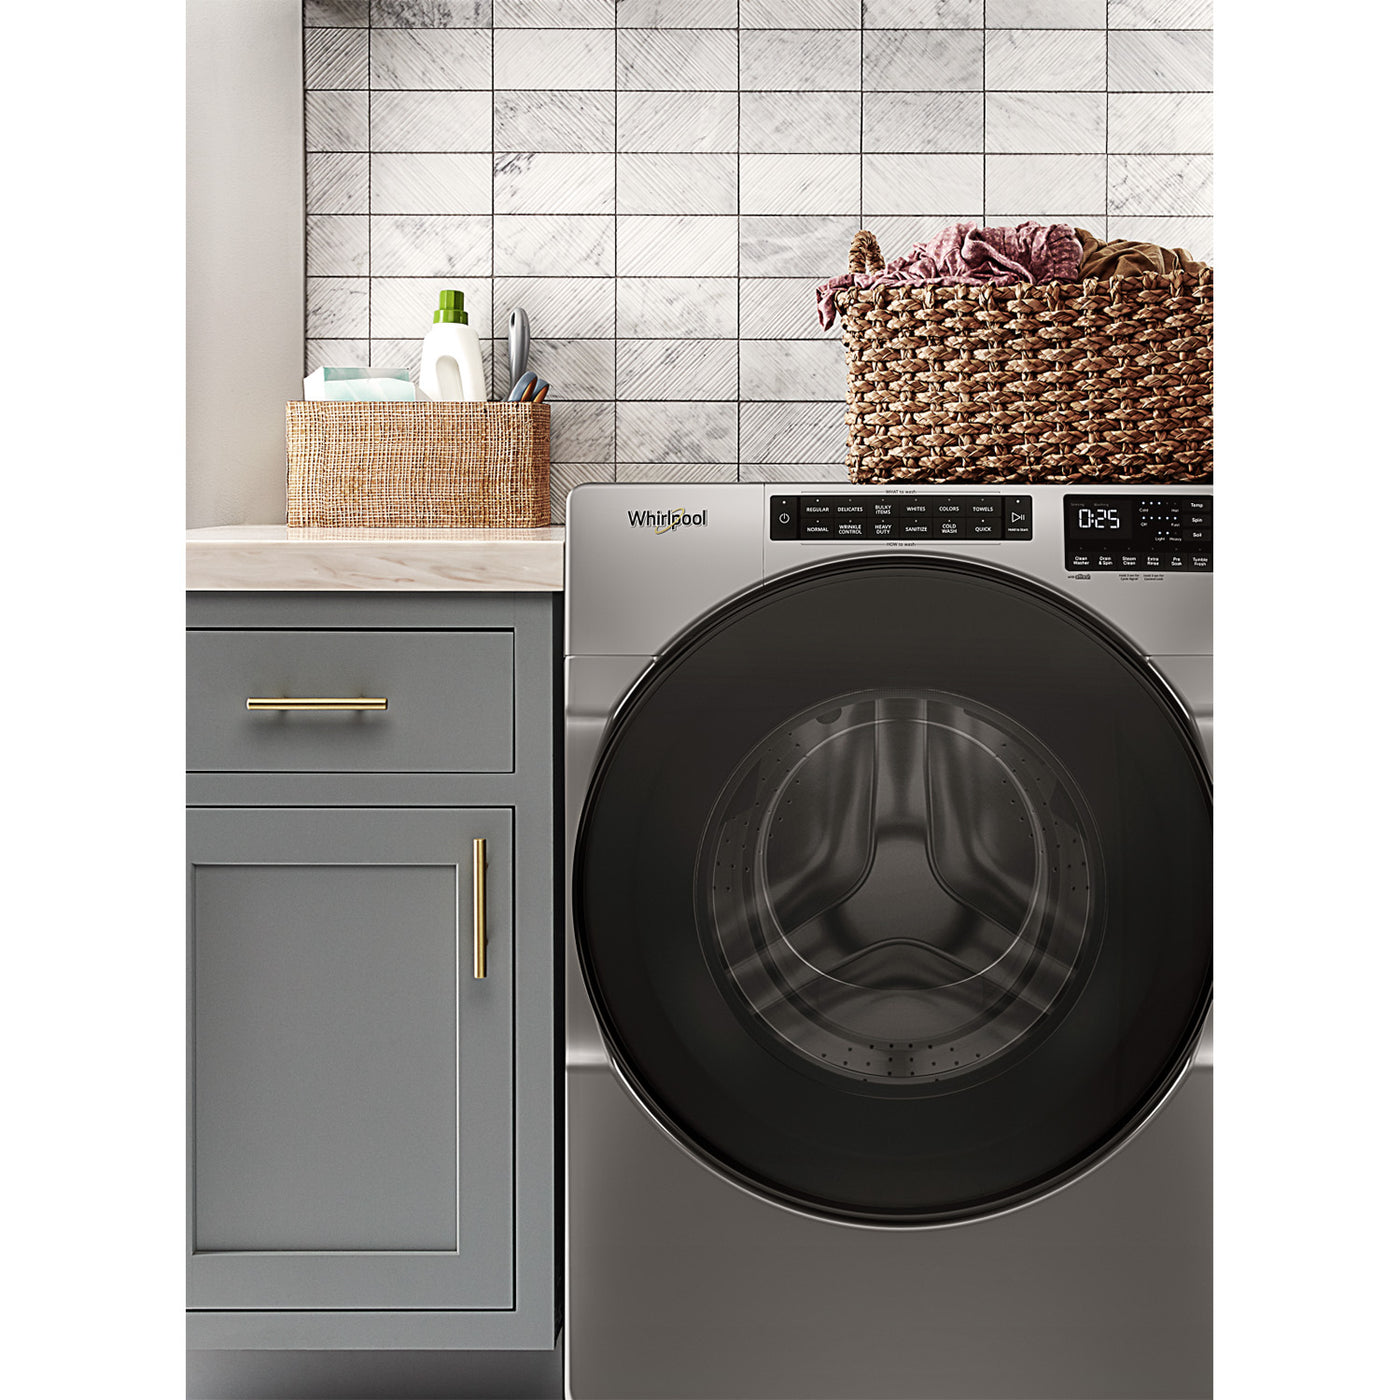 Whirlpool Chrome Shadow Front-Load Washer (5.8 cu. ft.) & Electric Dryer (7.4 cu. ft.) - WFW6605MC/YWED5605MC